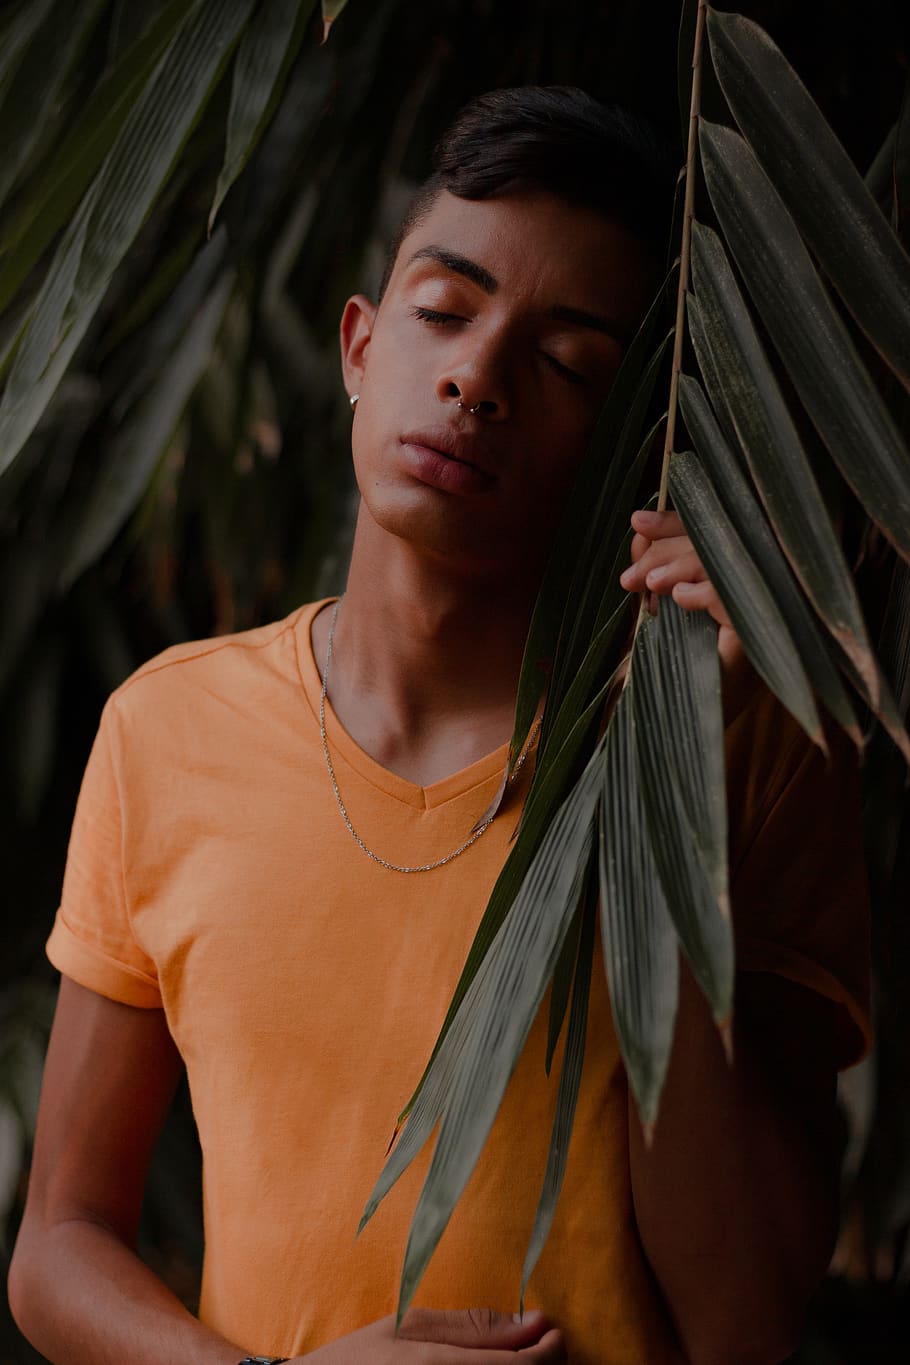 Photo of Boy in Orange V-neck T-shirt Posing Next To Green Leafed Plant With His Eyes Closed, HD wallpaper